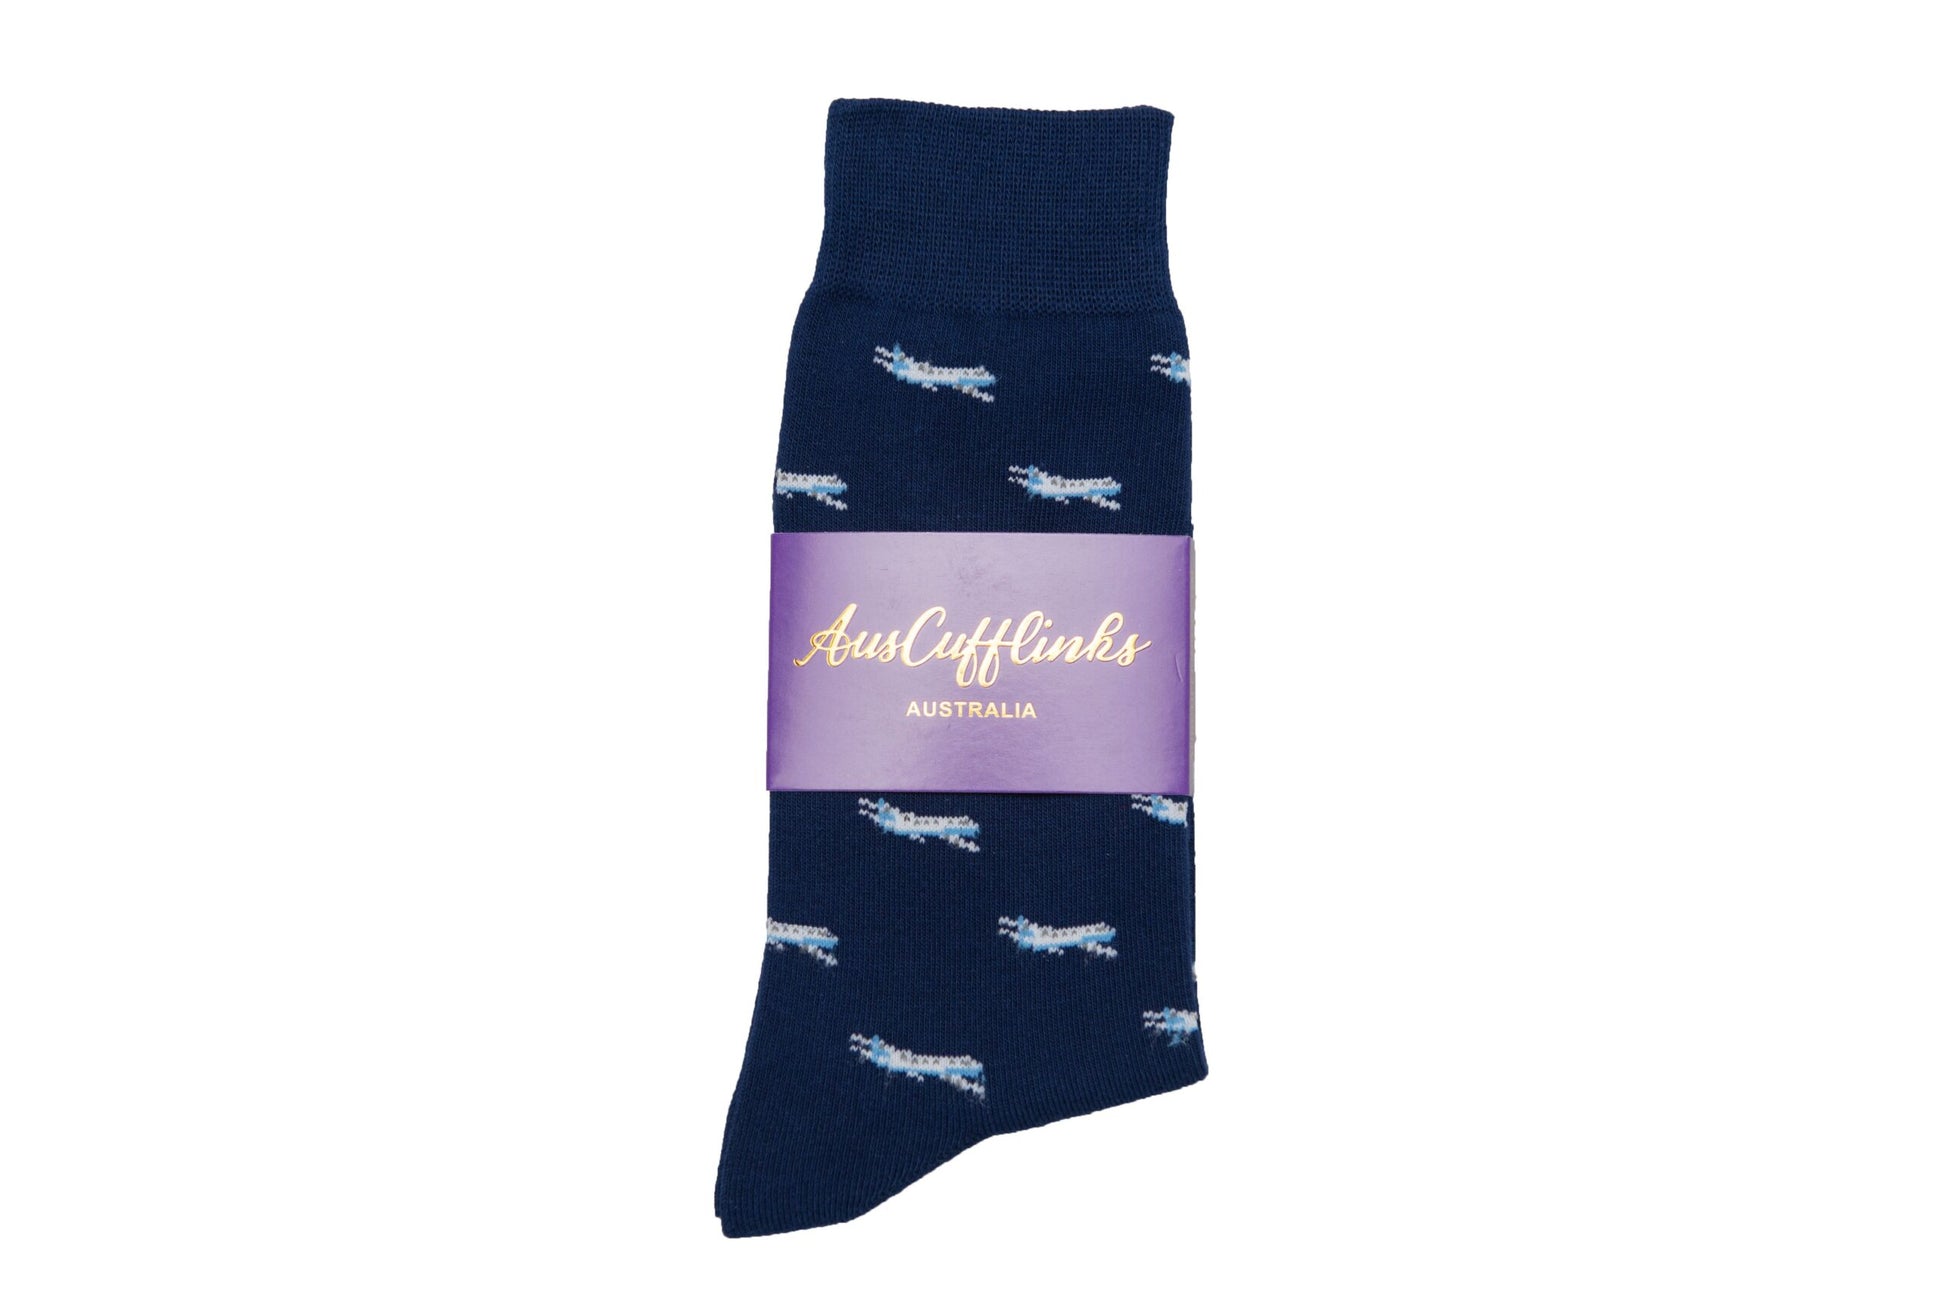 A navy Aeroplane sock with a white airplane design.